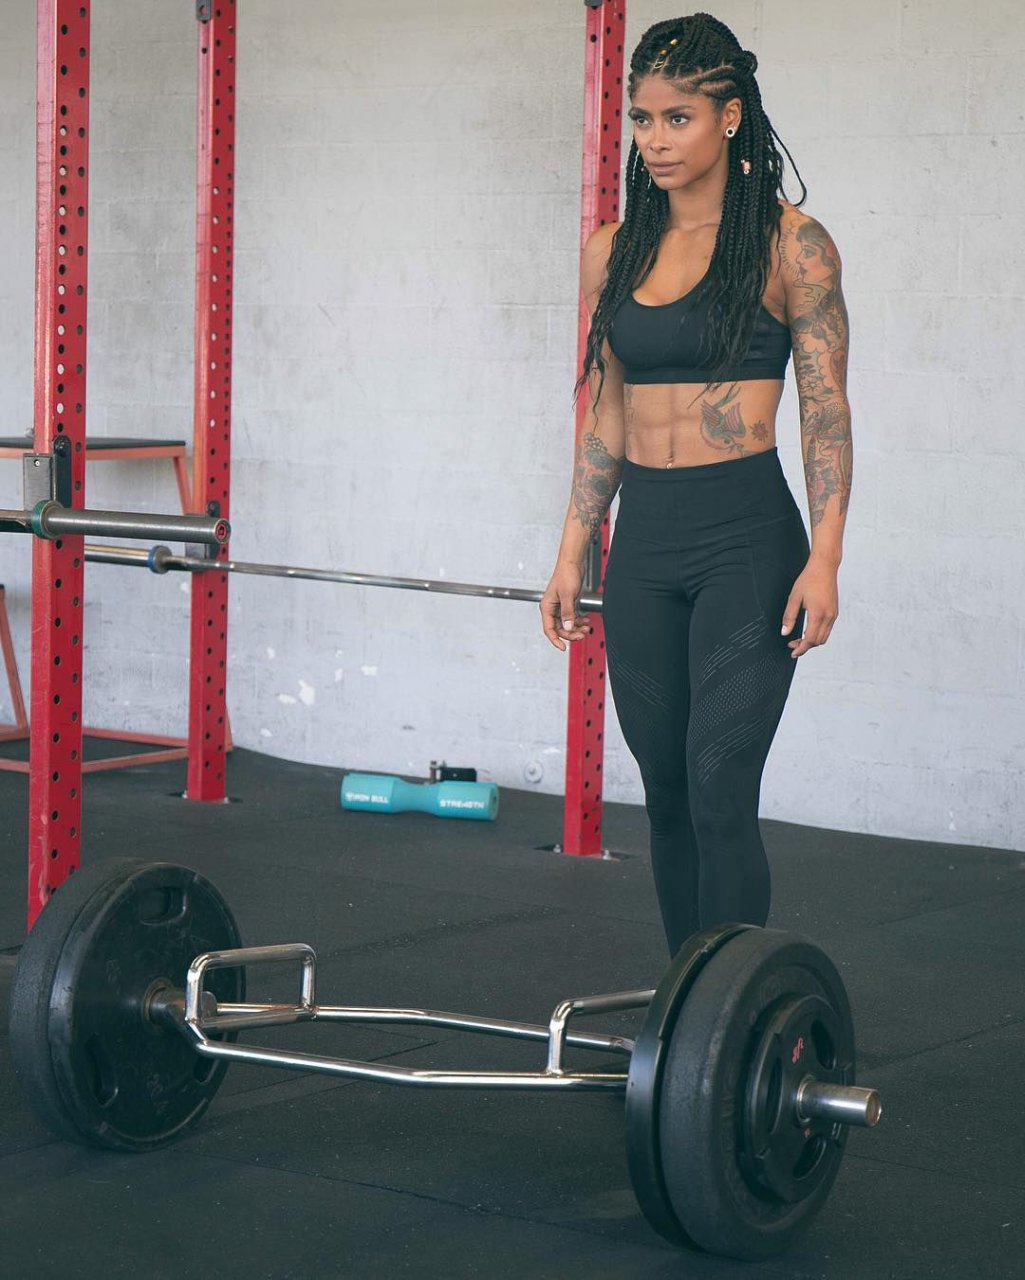 Well-known fitness trainer Massy Arias always finds time for her training. 